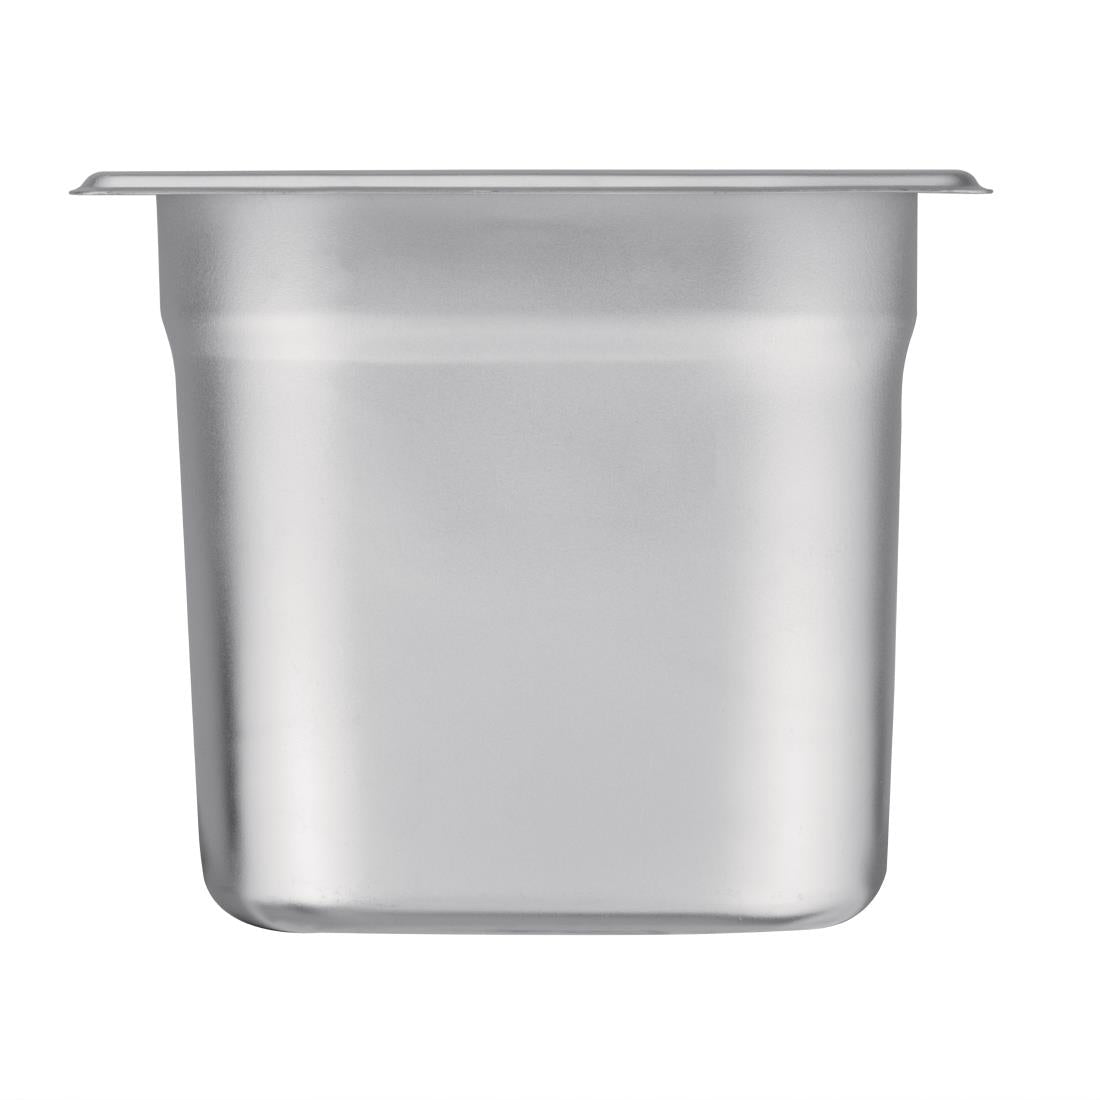 K826 Vogue Stainless Steel 1/9 Gastronorm Pan 150mm JD Catering Equipment Solutions Ltd